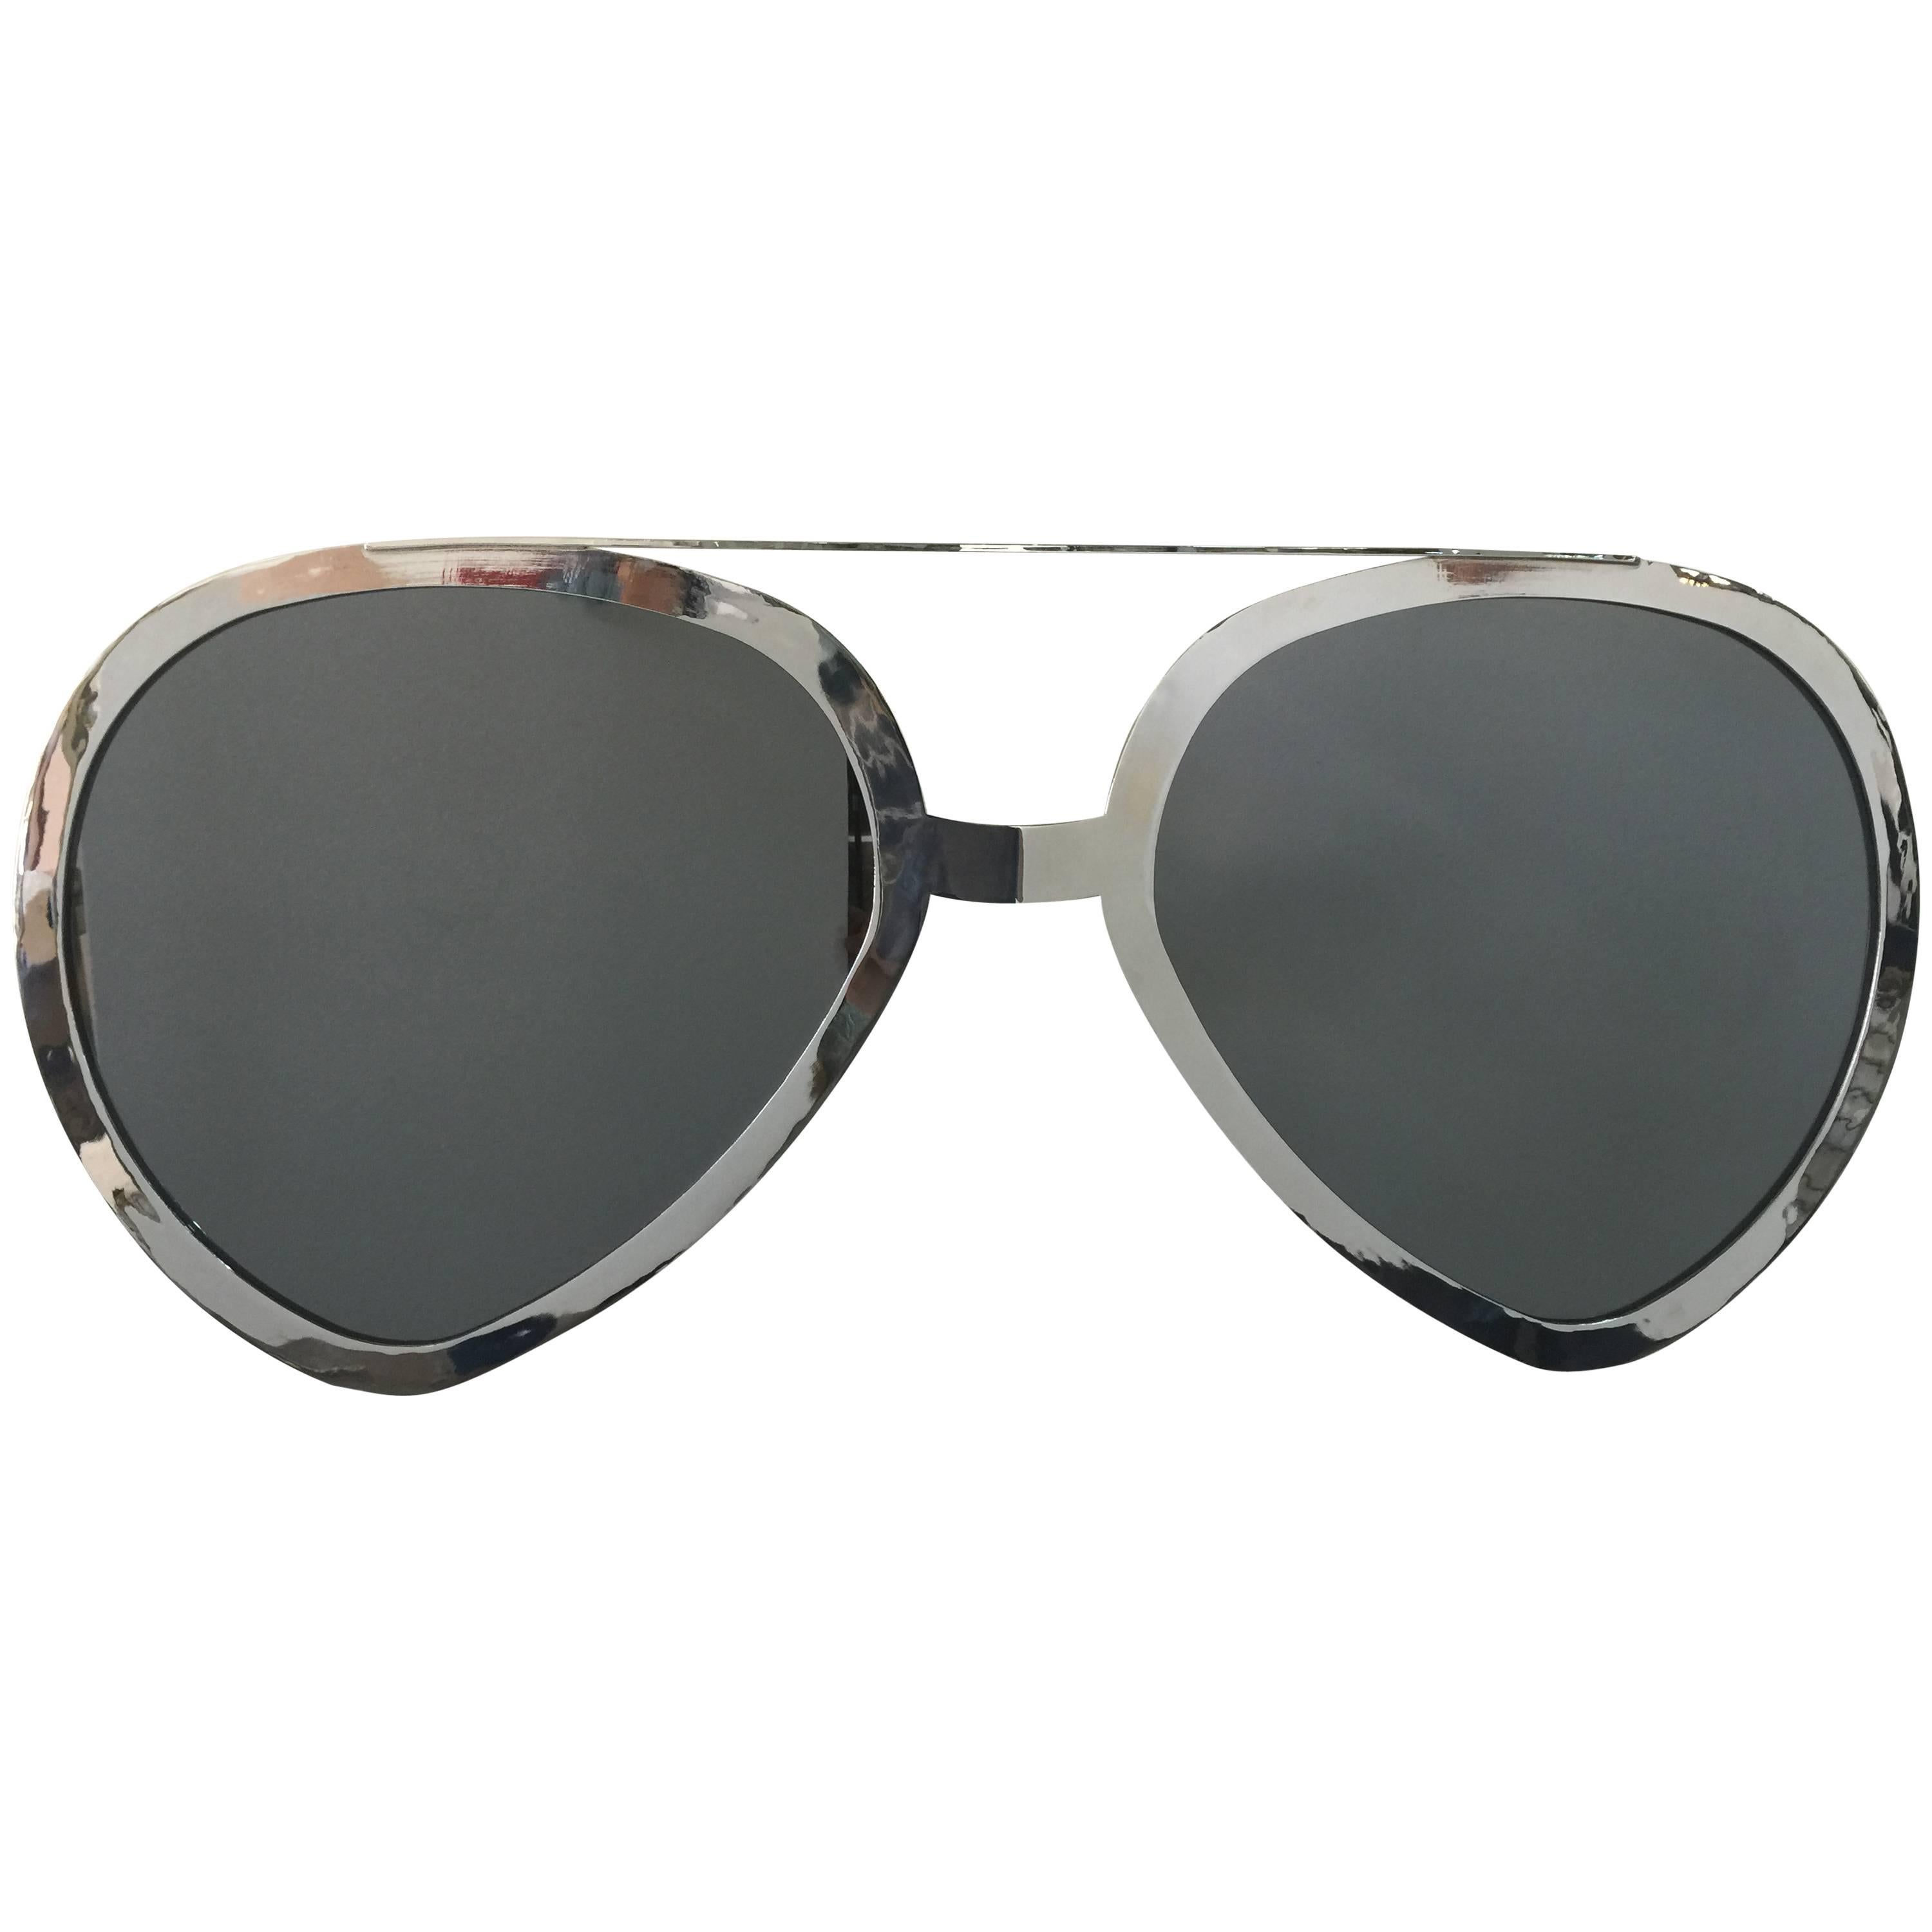 Aviator Glasses Wall Mirror in Polished Chrome Frame